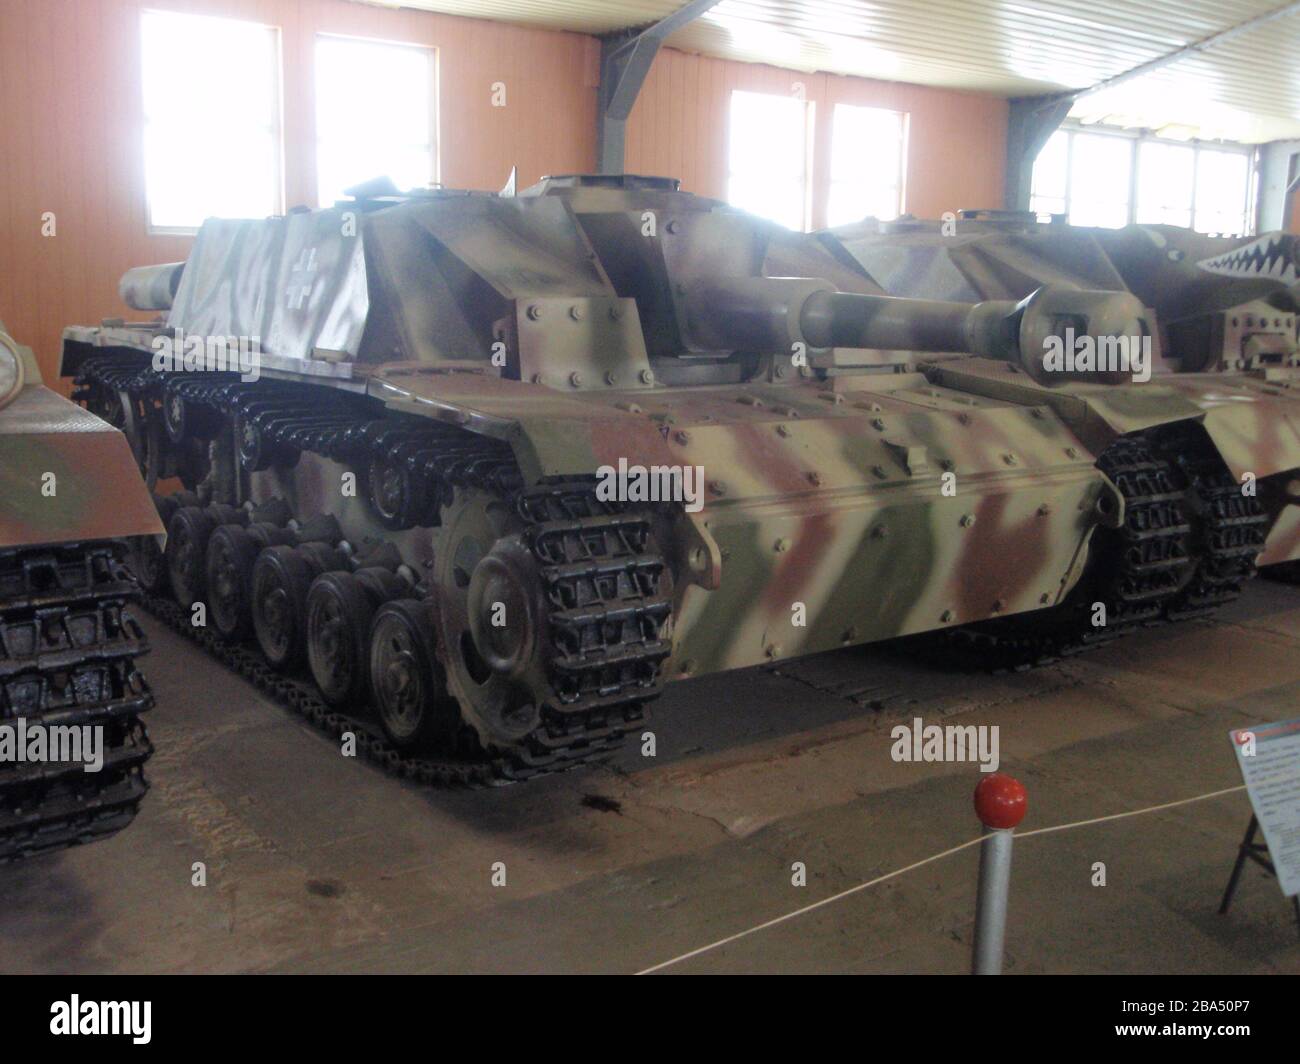 Page 2 - Ausf High Resolution Stock Photography and Images - Alamy